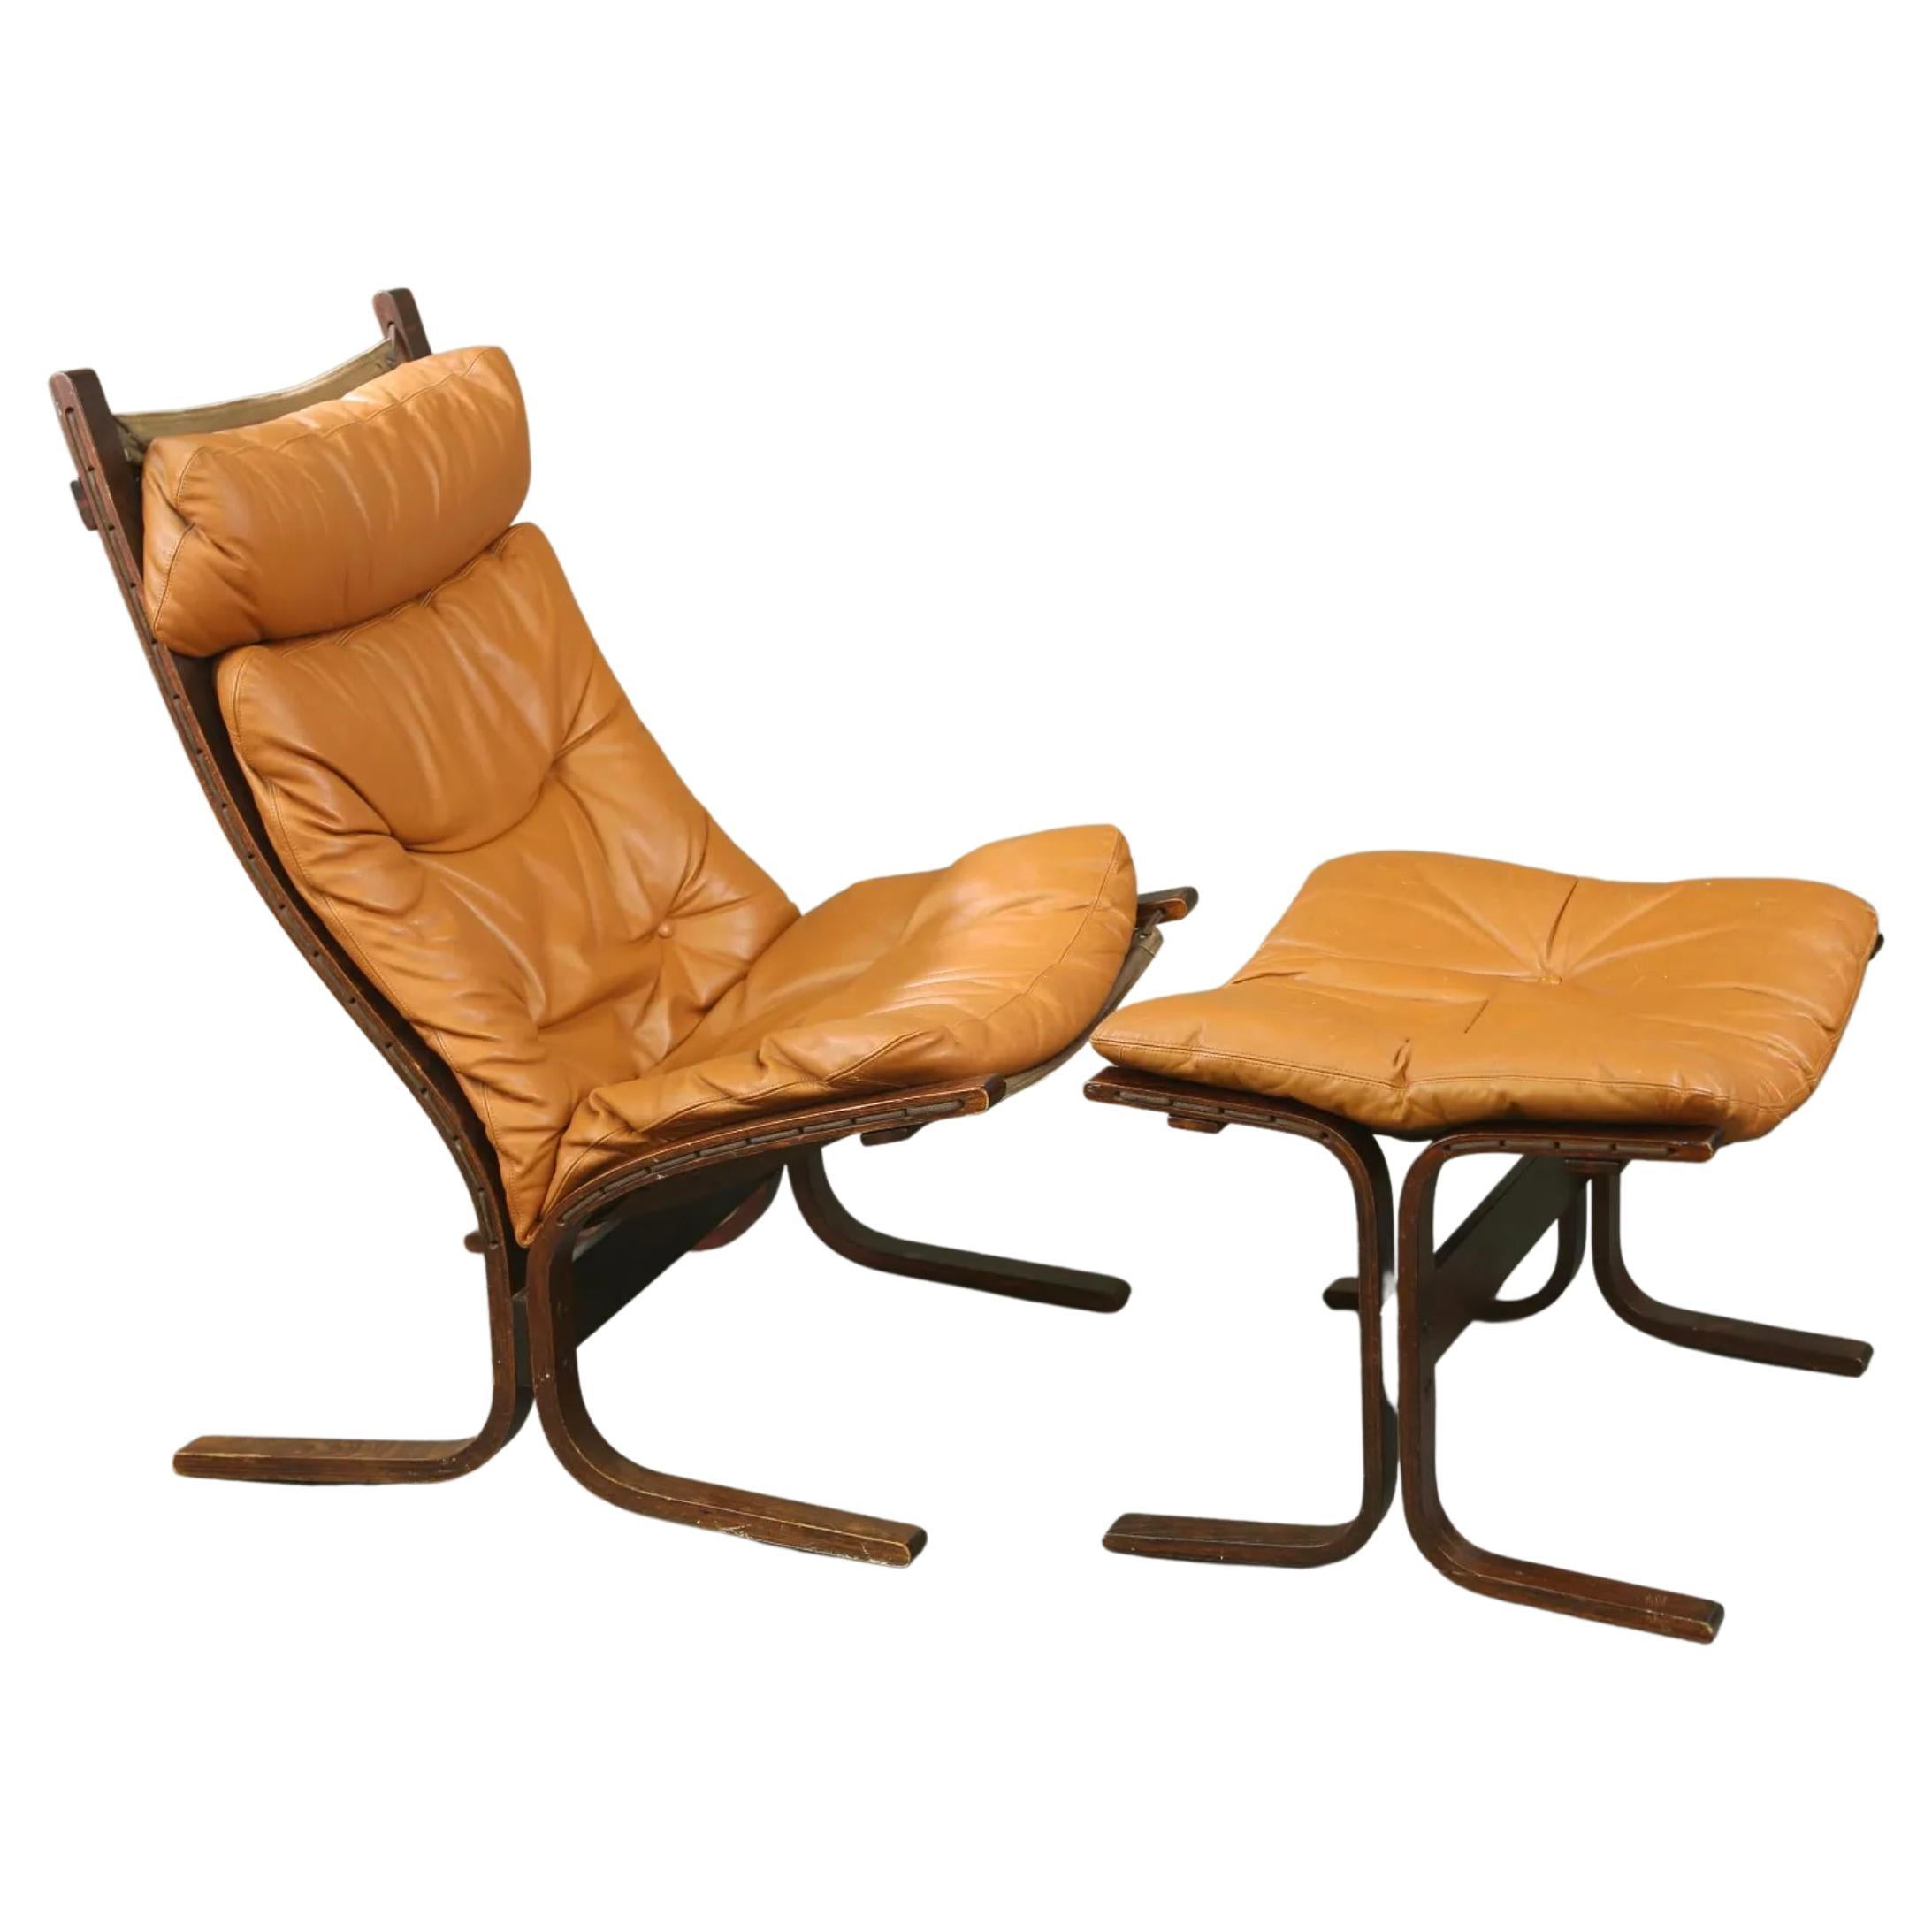 Midcentury Scandinavian Modern leather lounge chair and ottoman by Westnofa.

Westnofa Norwegian modern Tall Siesta chair and ottoman. Wooden frame, removable leather chair and ottoman cushions with Bentwood frame and cloth sling backing. Westnofa